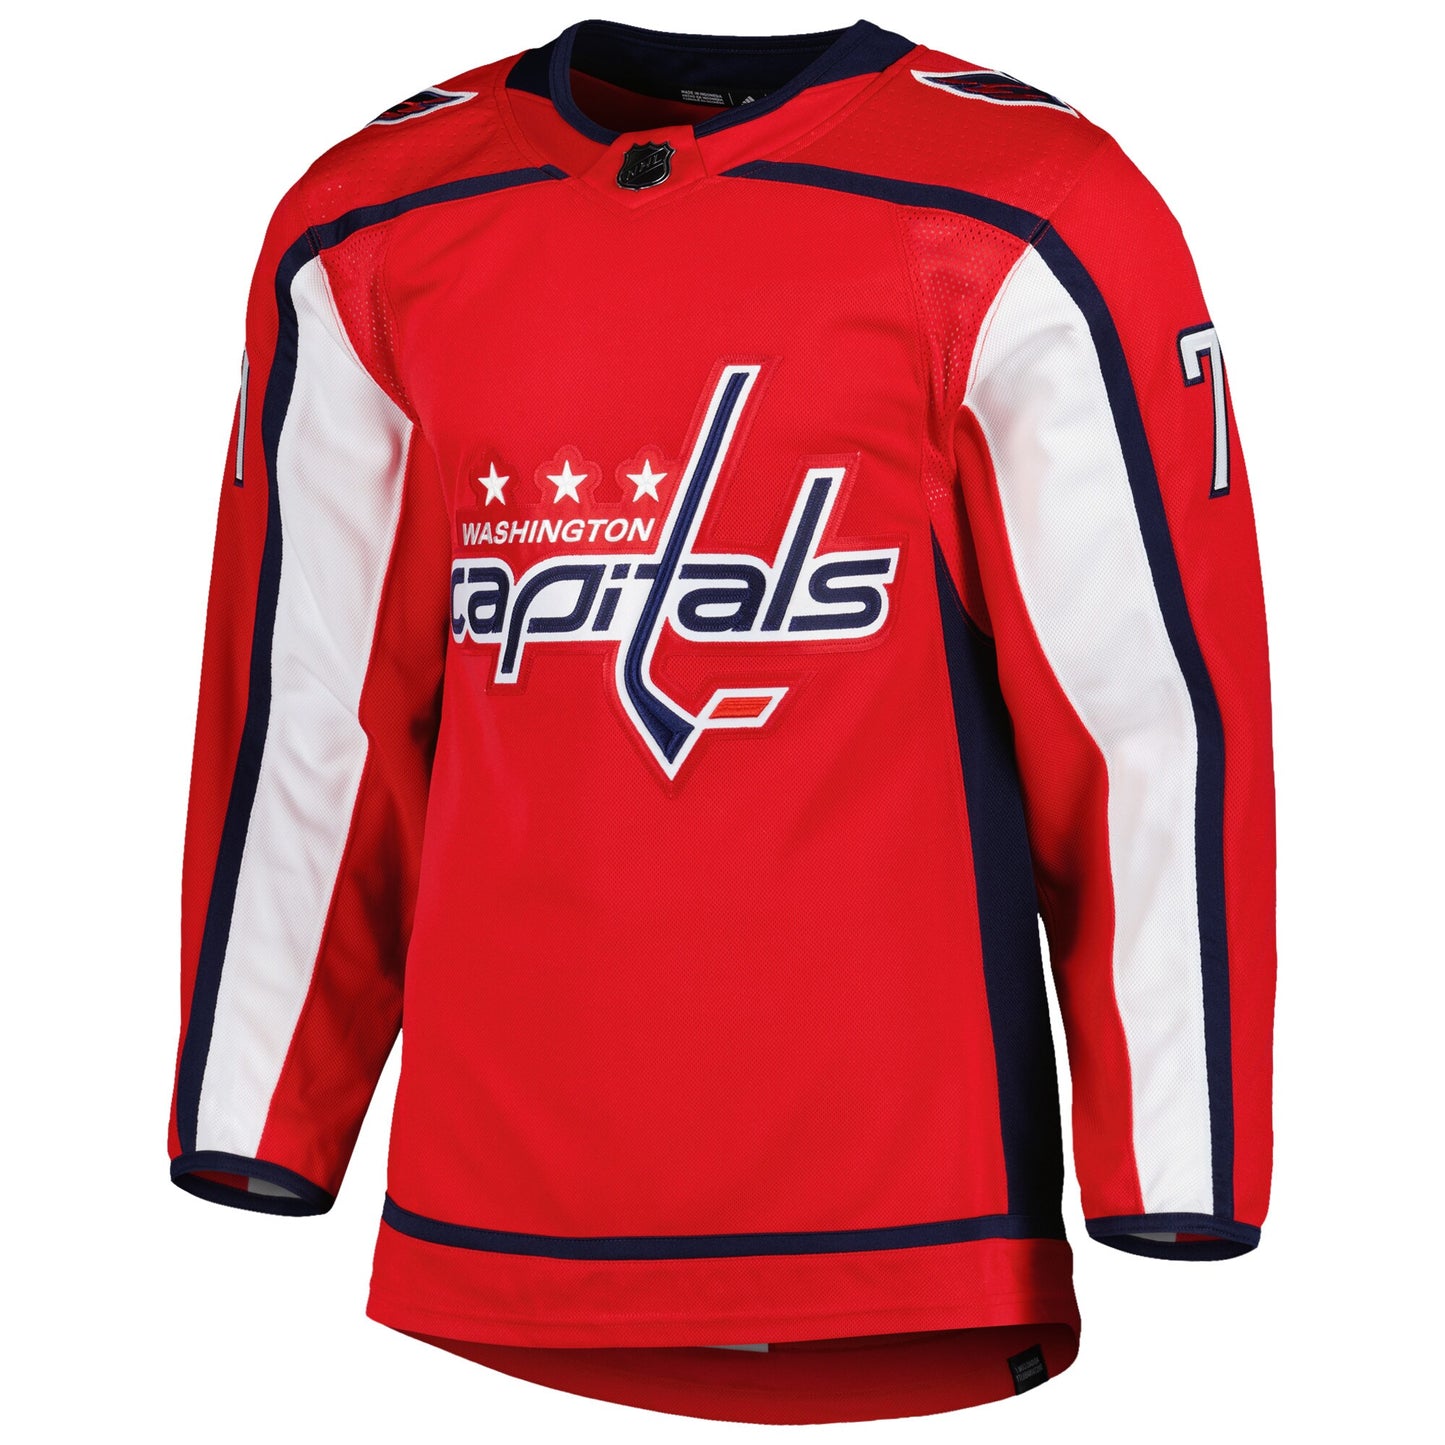 TJ Oshie Washington Capitals adidas Home Primegreen Authentic Pro Player Jersey - Red